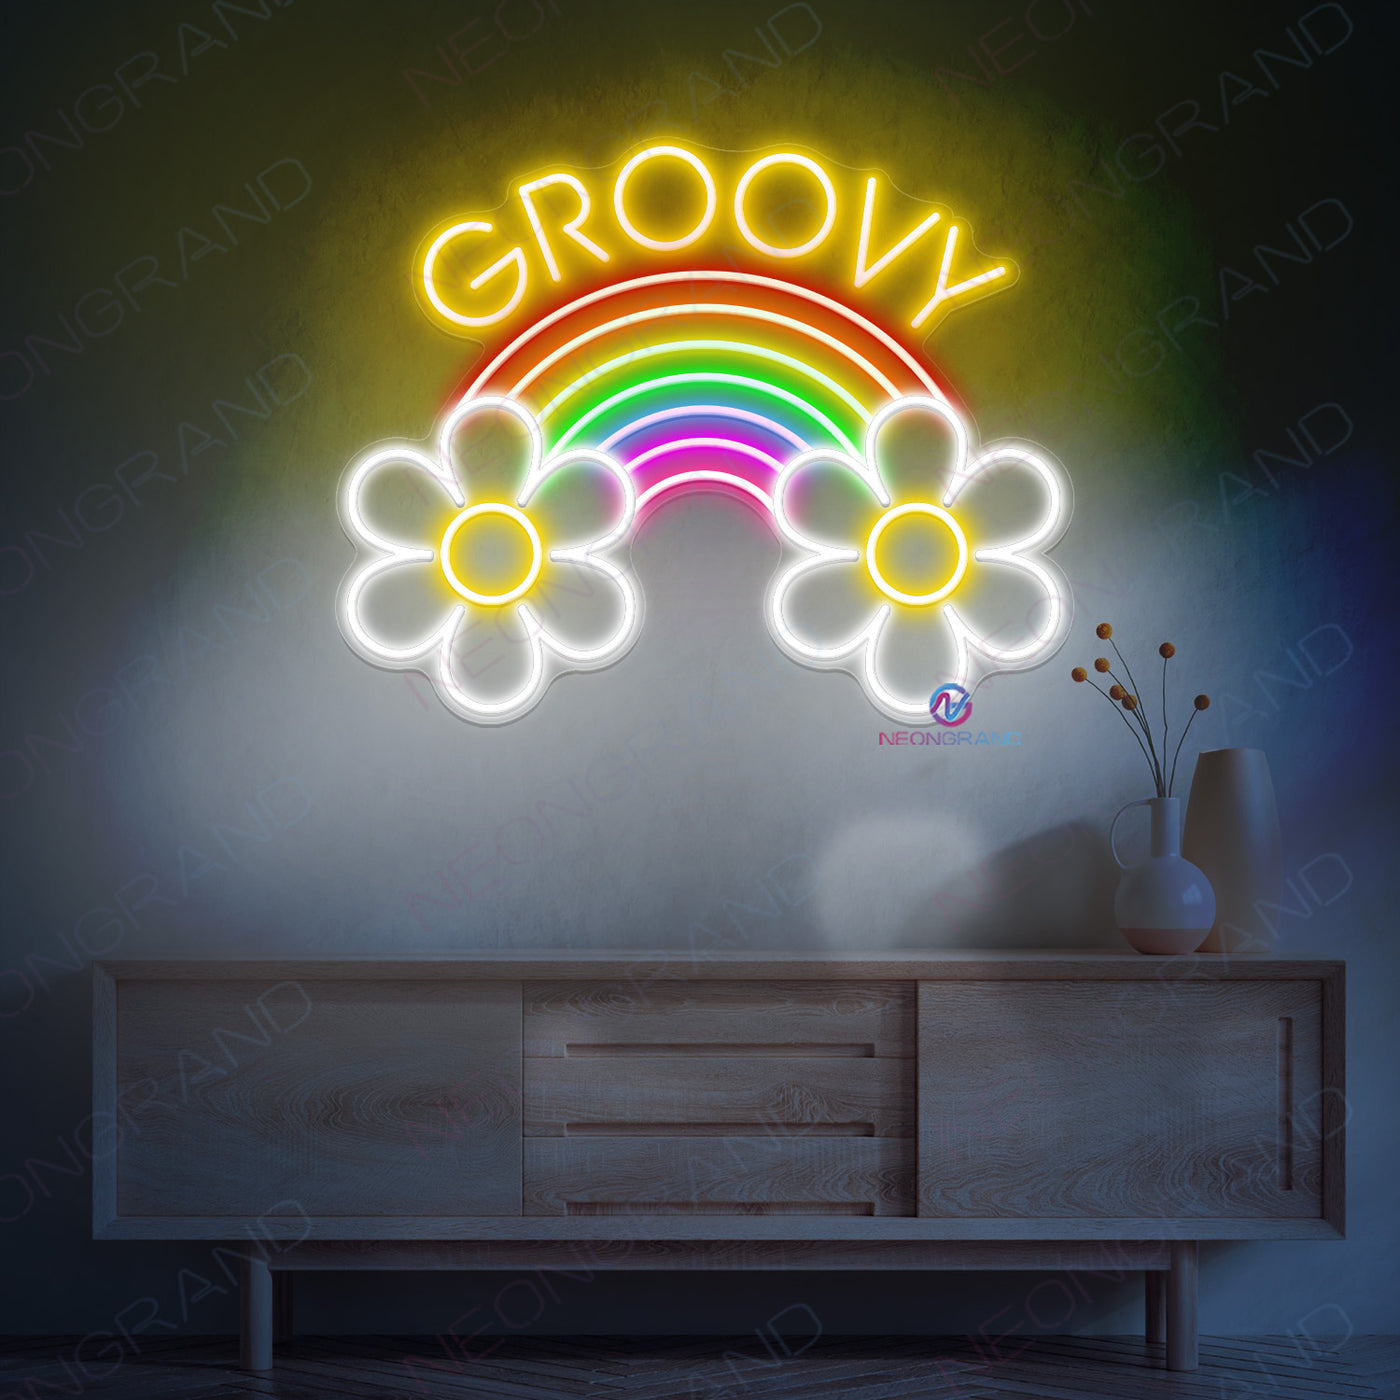 Groovy Neon Sign Colorful Led Light